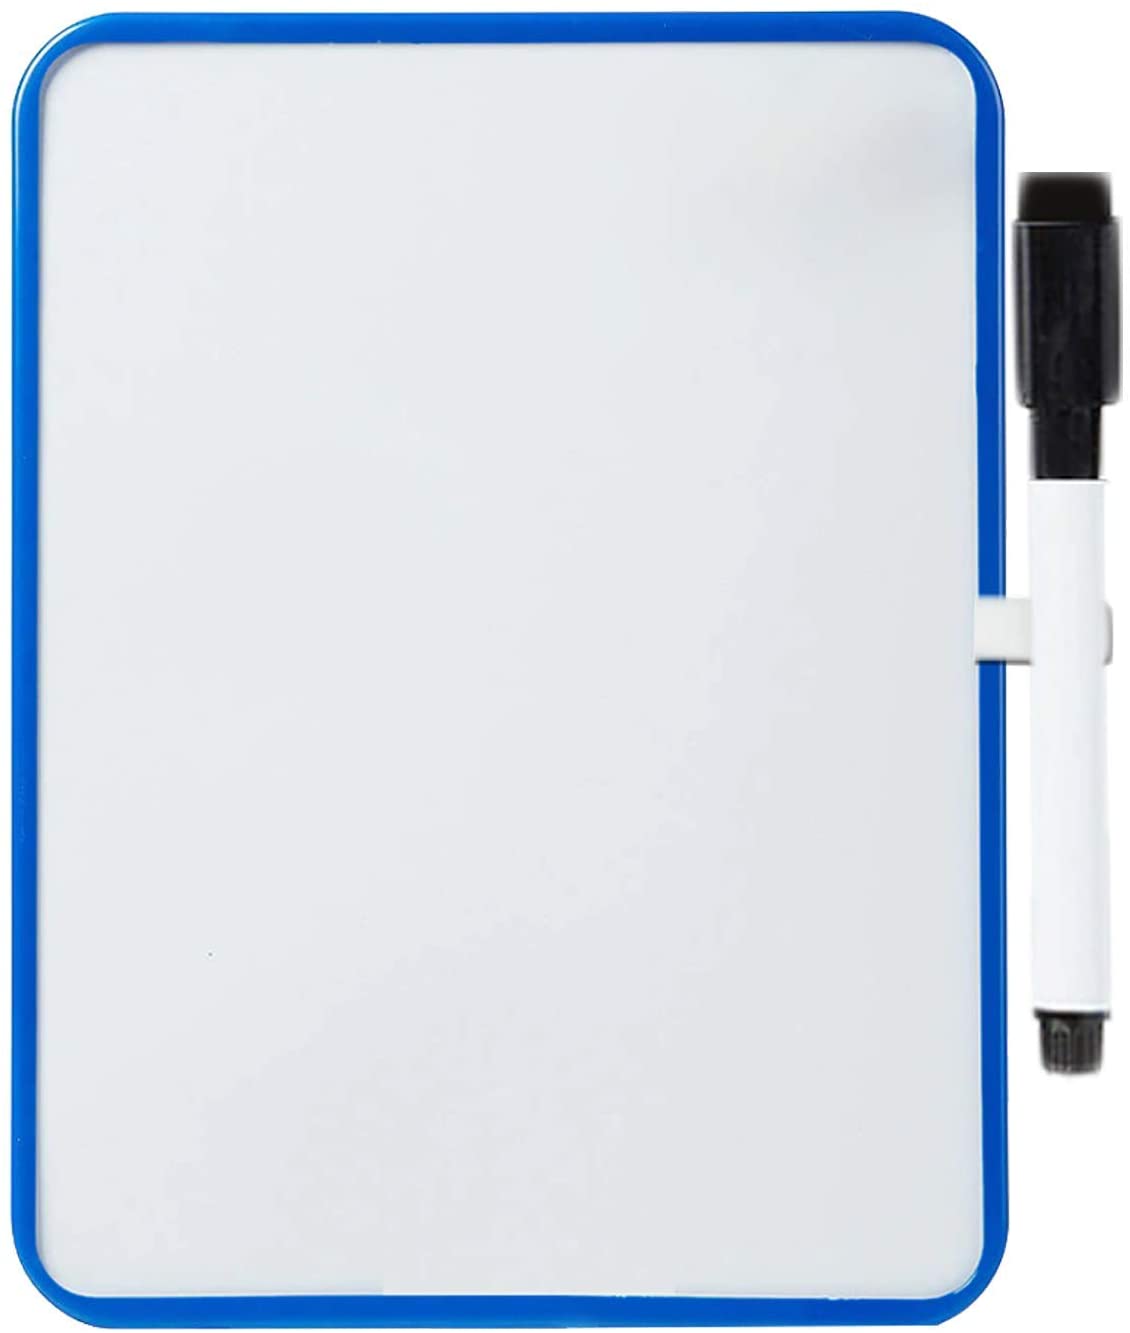 Ixir Small Dry Erase Board 6.5 x 8.25-inch-Magnetic Portable Hanging  Whiteboard for Wall